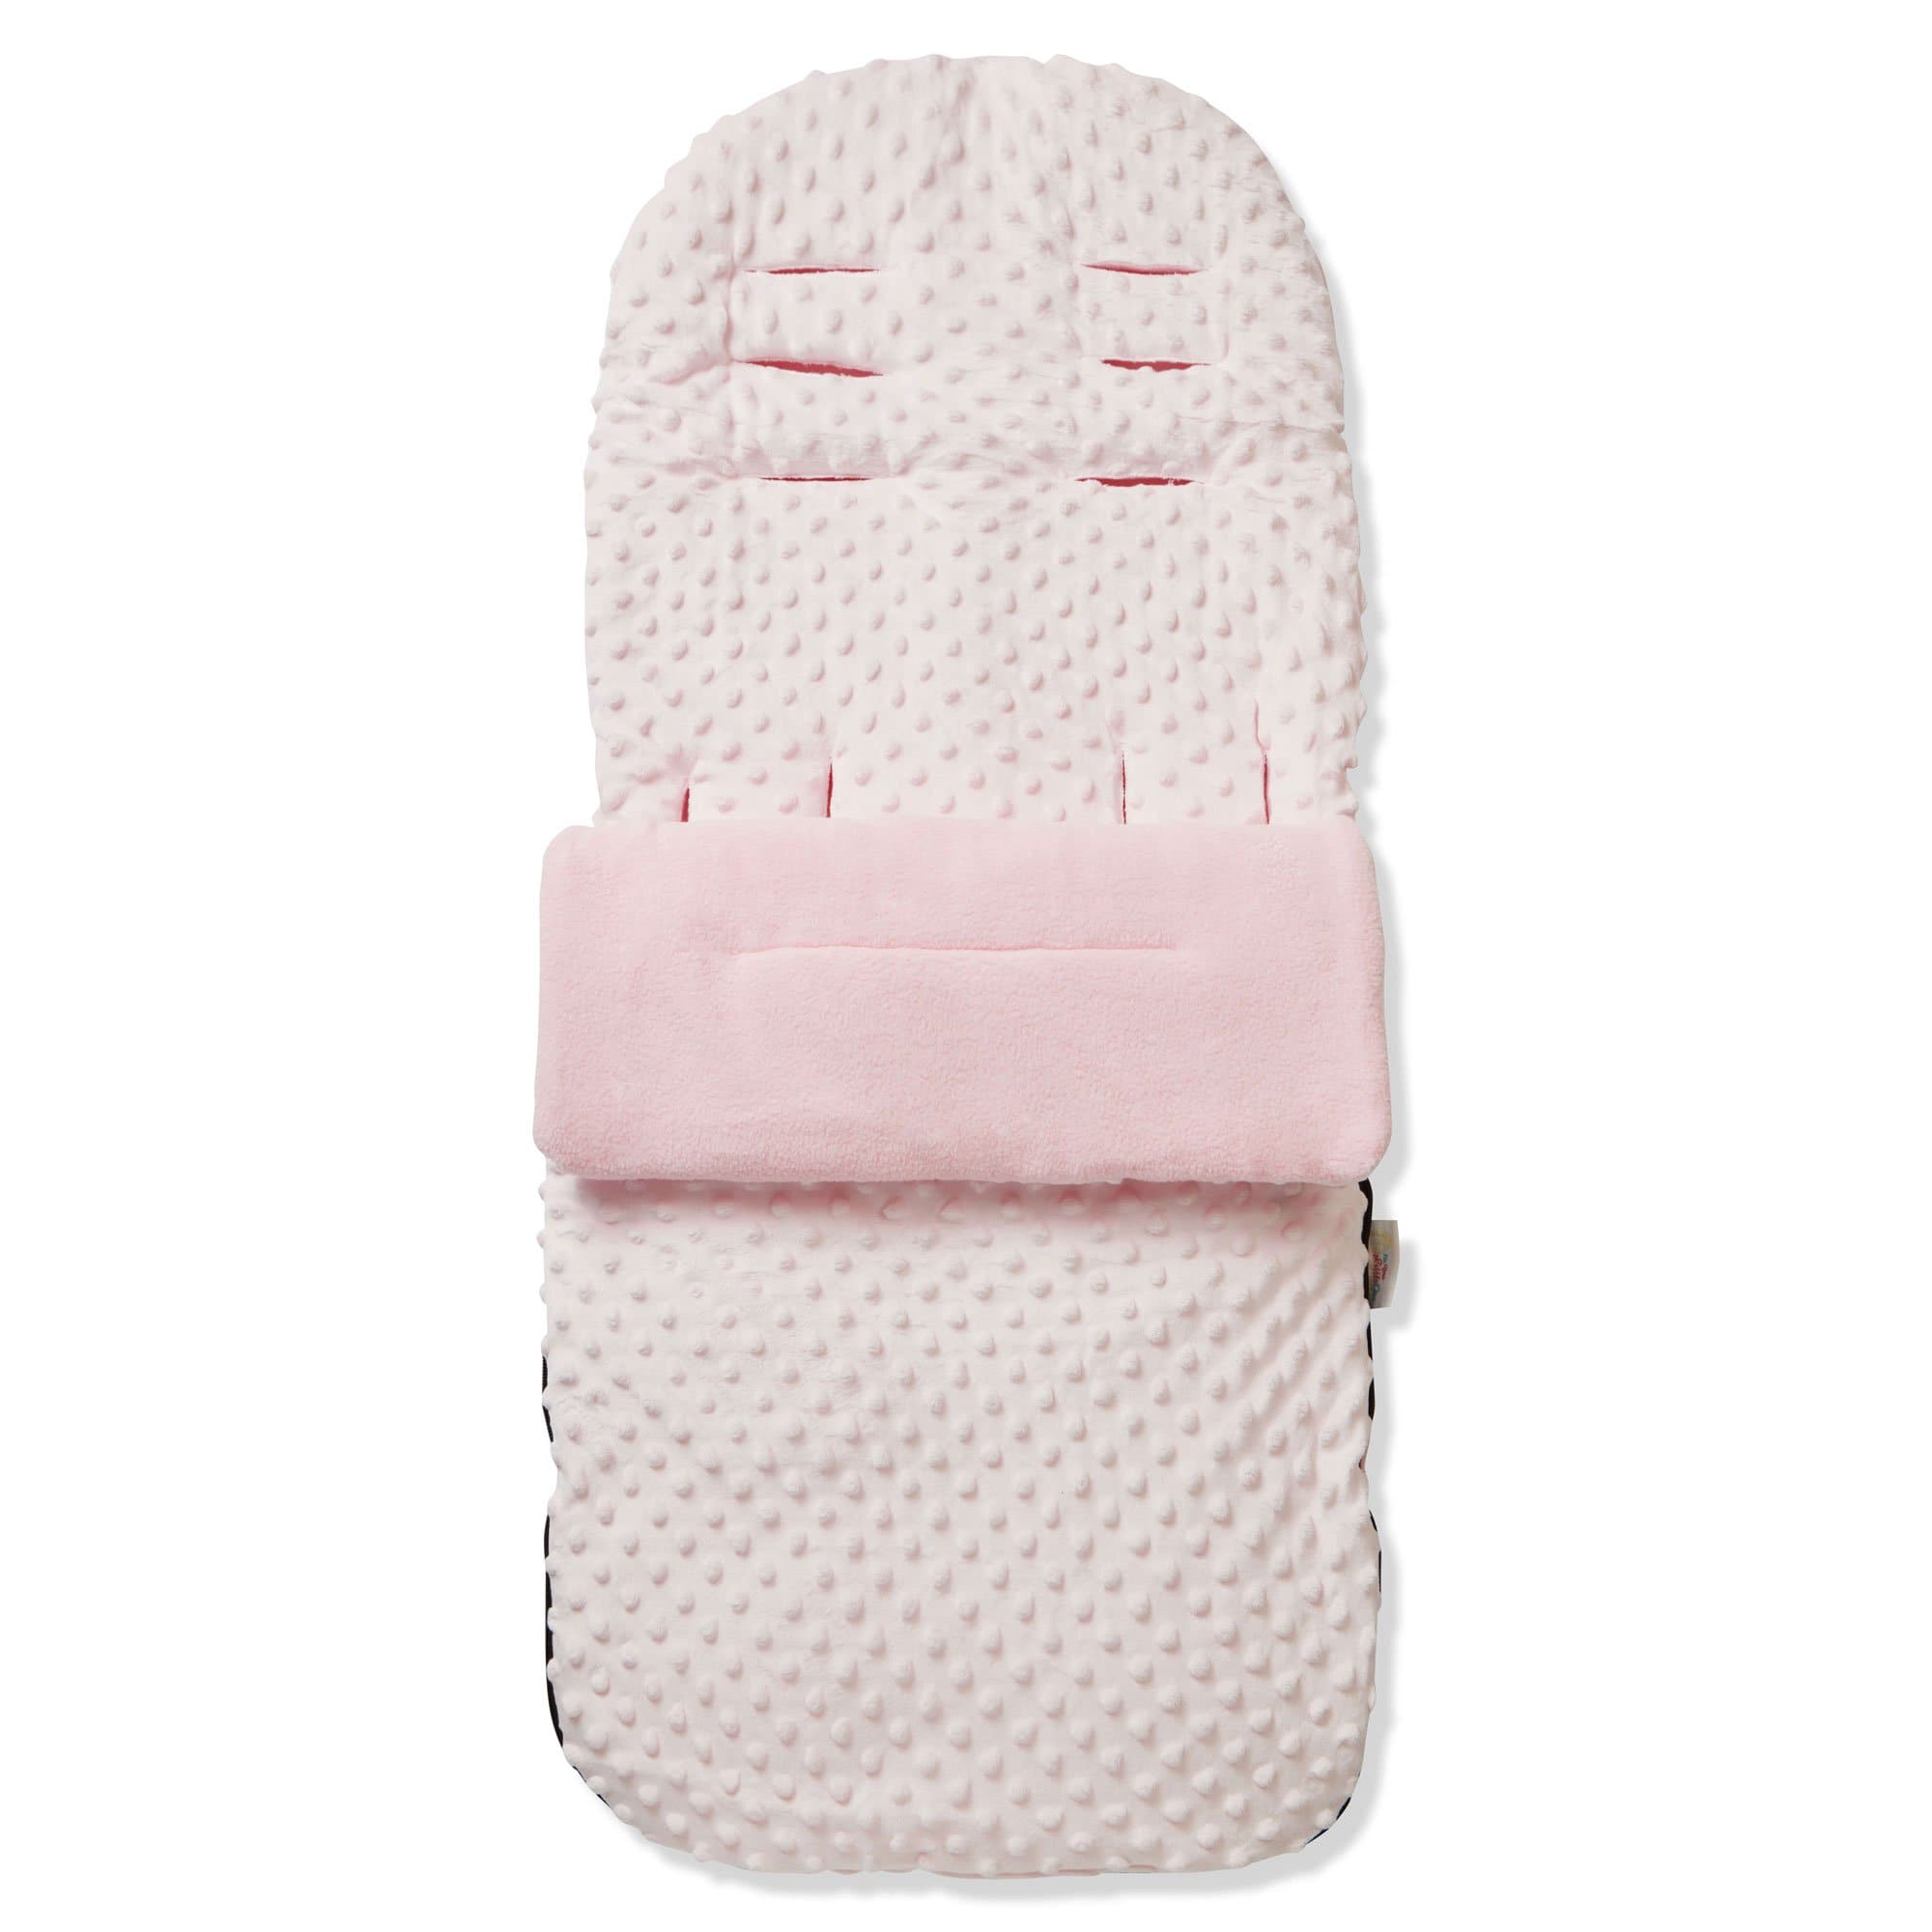 Dimple Footmuff / Cosy Toes Compatible with Mutsy - Pink / Fits All Models | For Your Little One